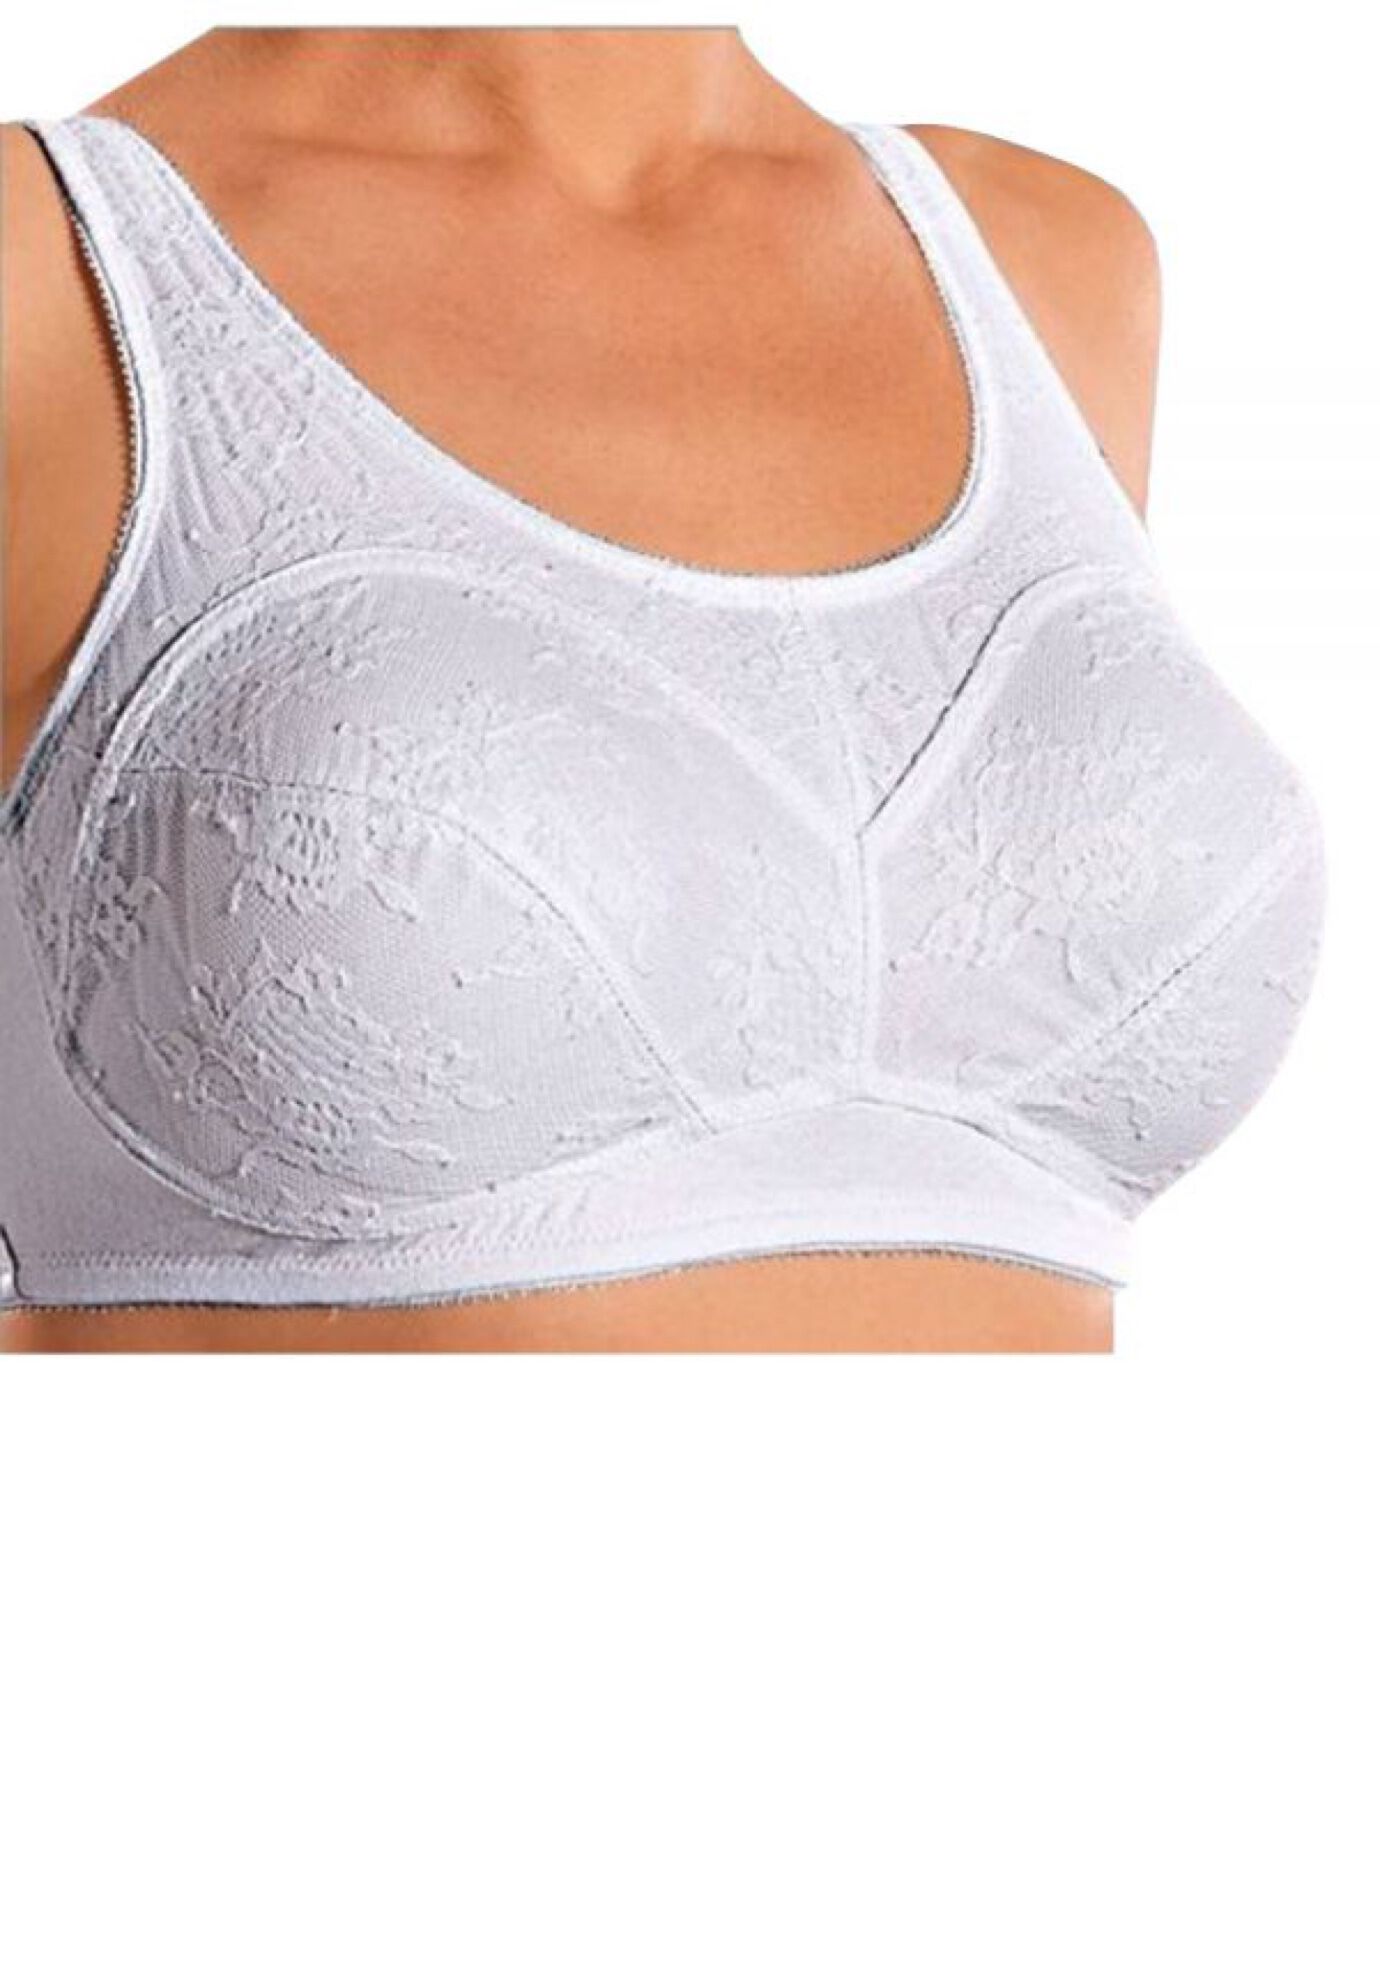 Plus Size Women's Full Figure Soft Cup Bra With Cotton Lining by Cortland® in White (Size 40 E)